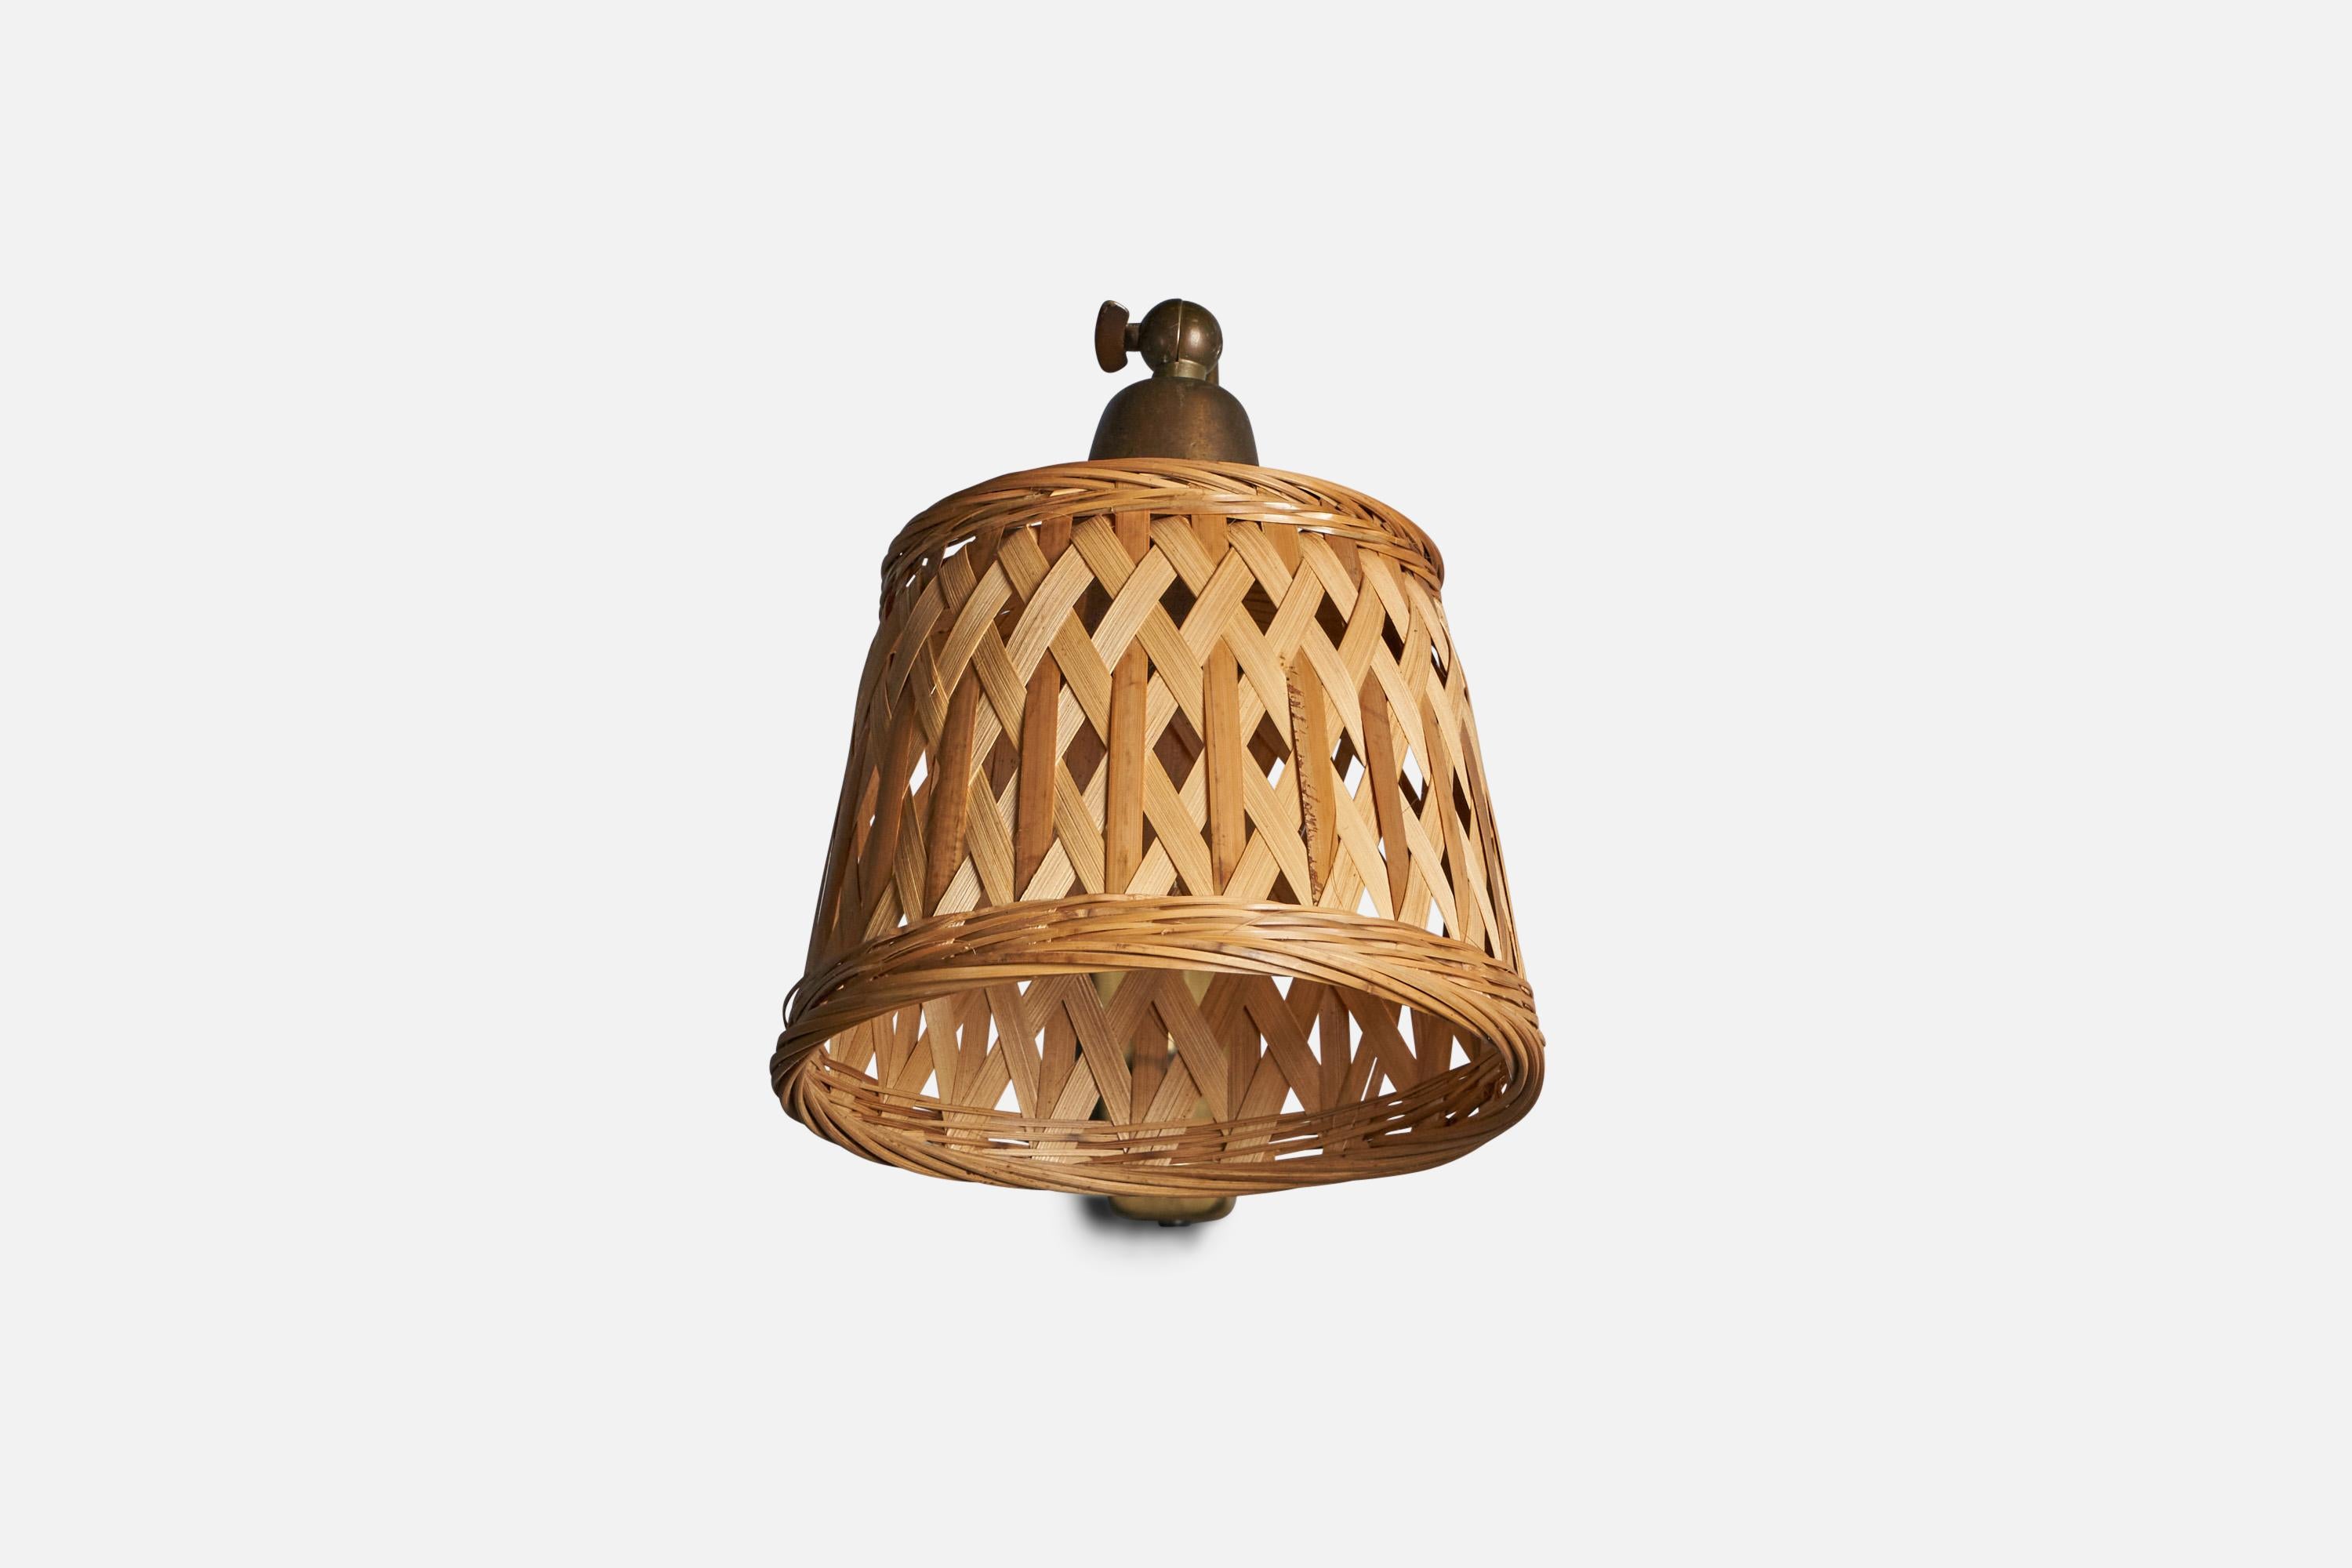 Danish Designer, Adjustable Wall Light, Brass, Rattan, Denmark, 1940s In Good Condition For Sale In High Point, NC